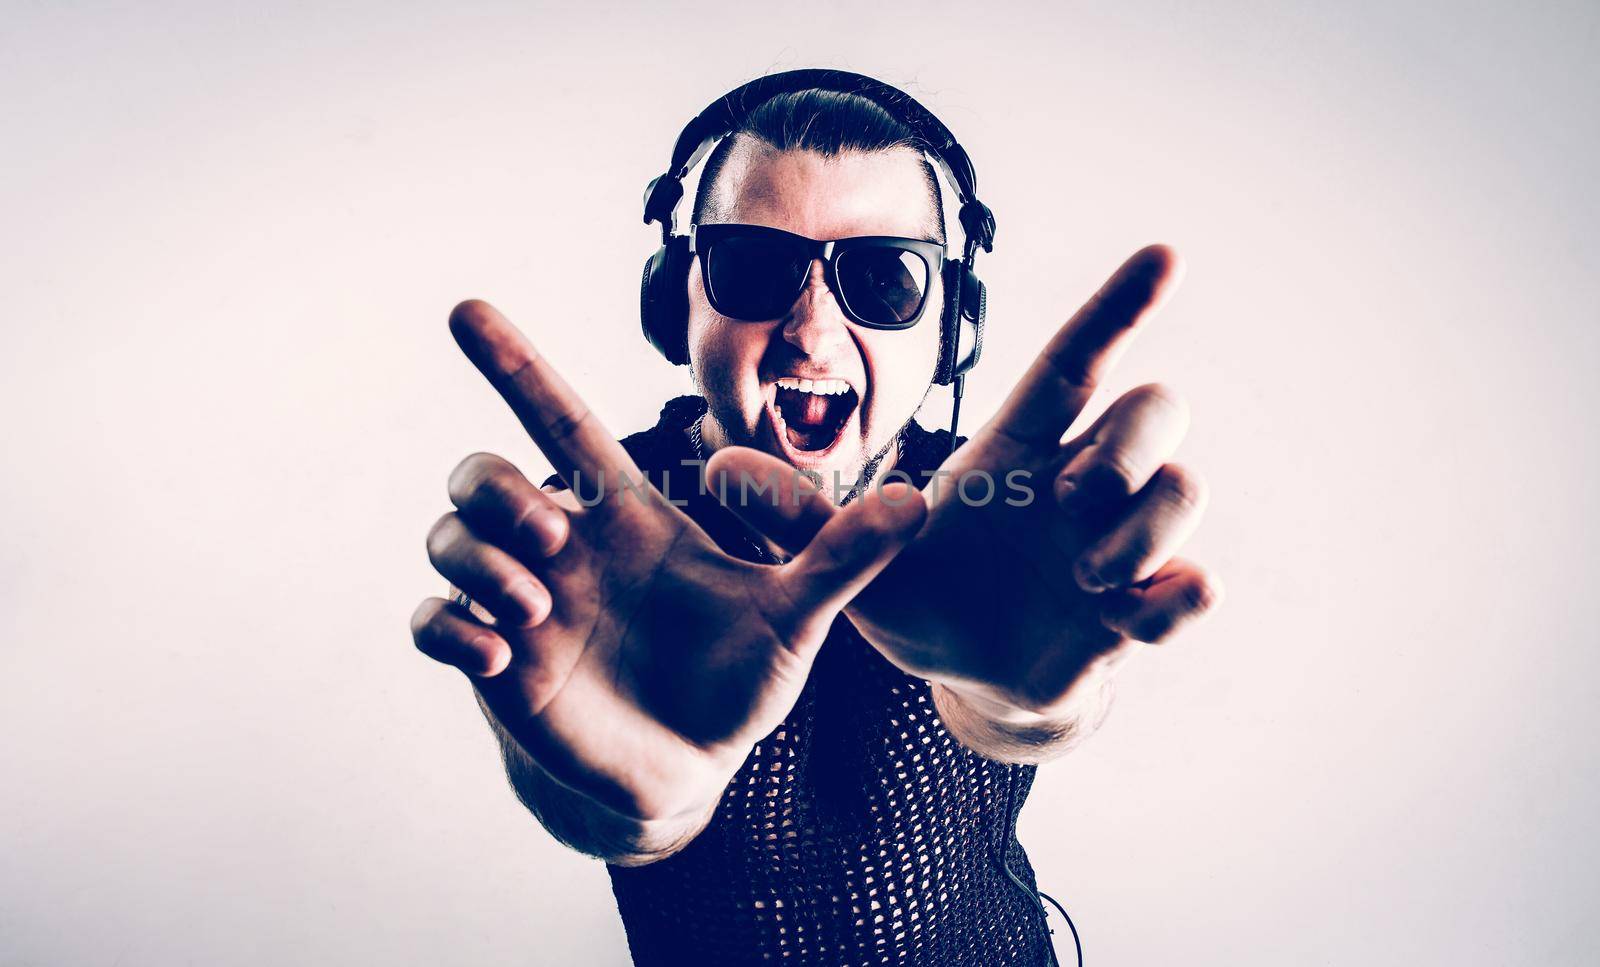 view from the top - DJ - rapper in a stylish t-shirt with headphones and with hands up on white background . the photo has a empty space for your text